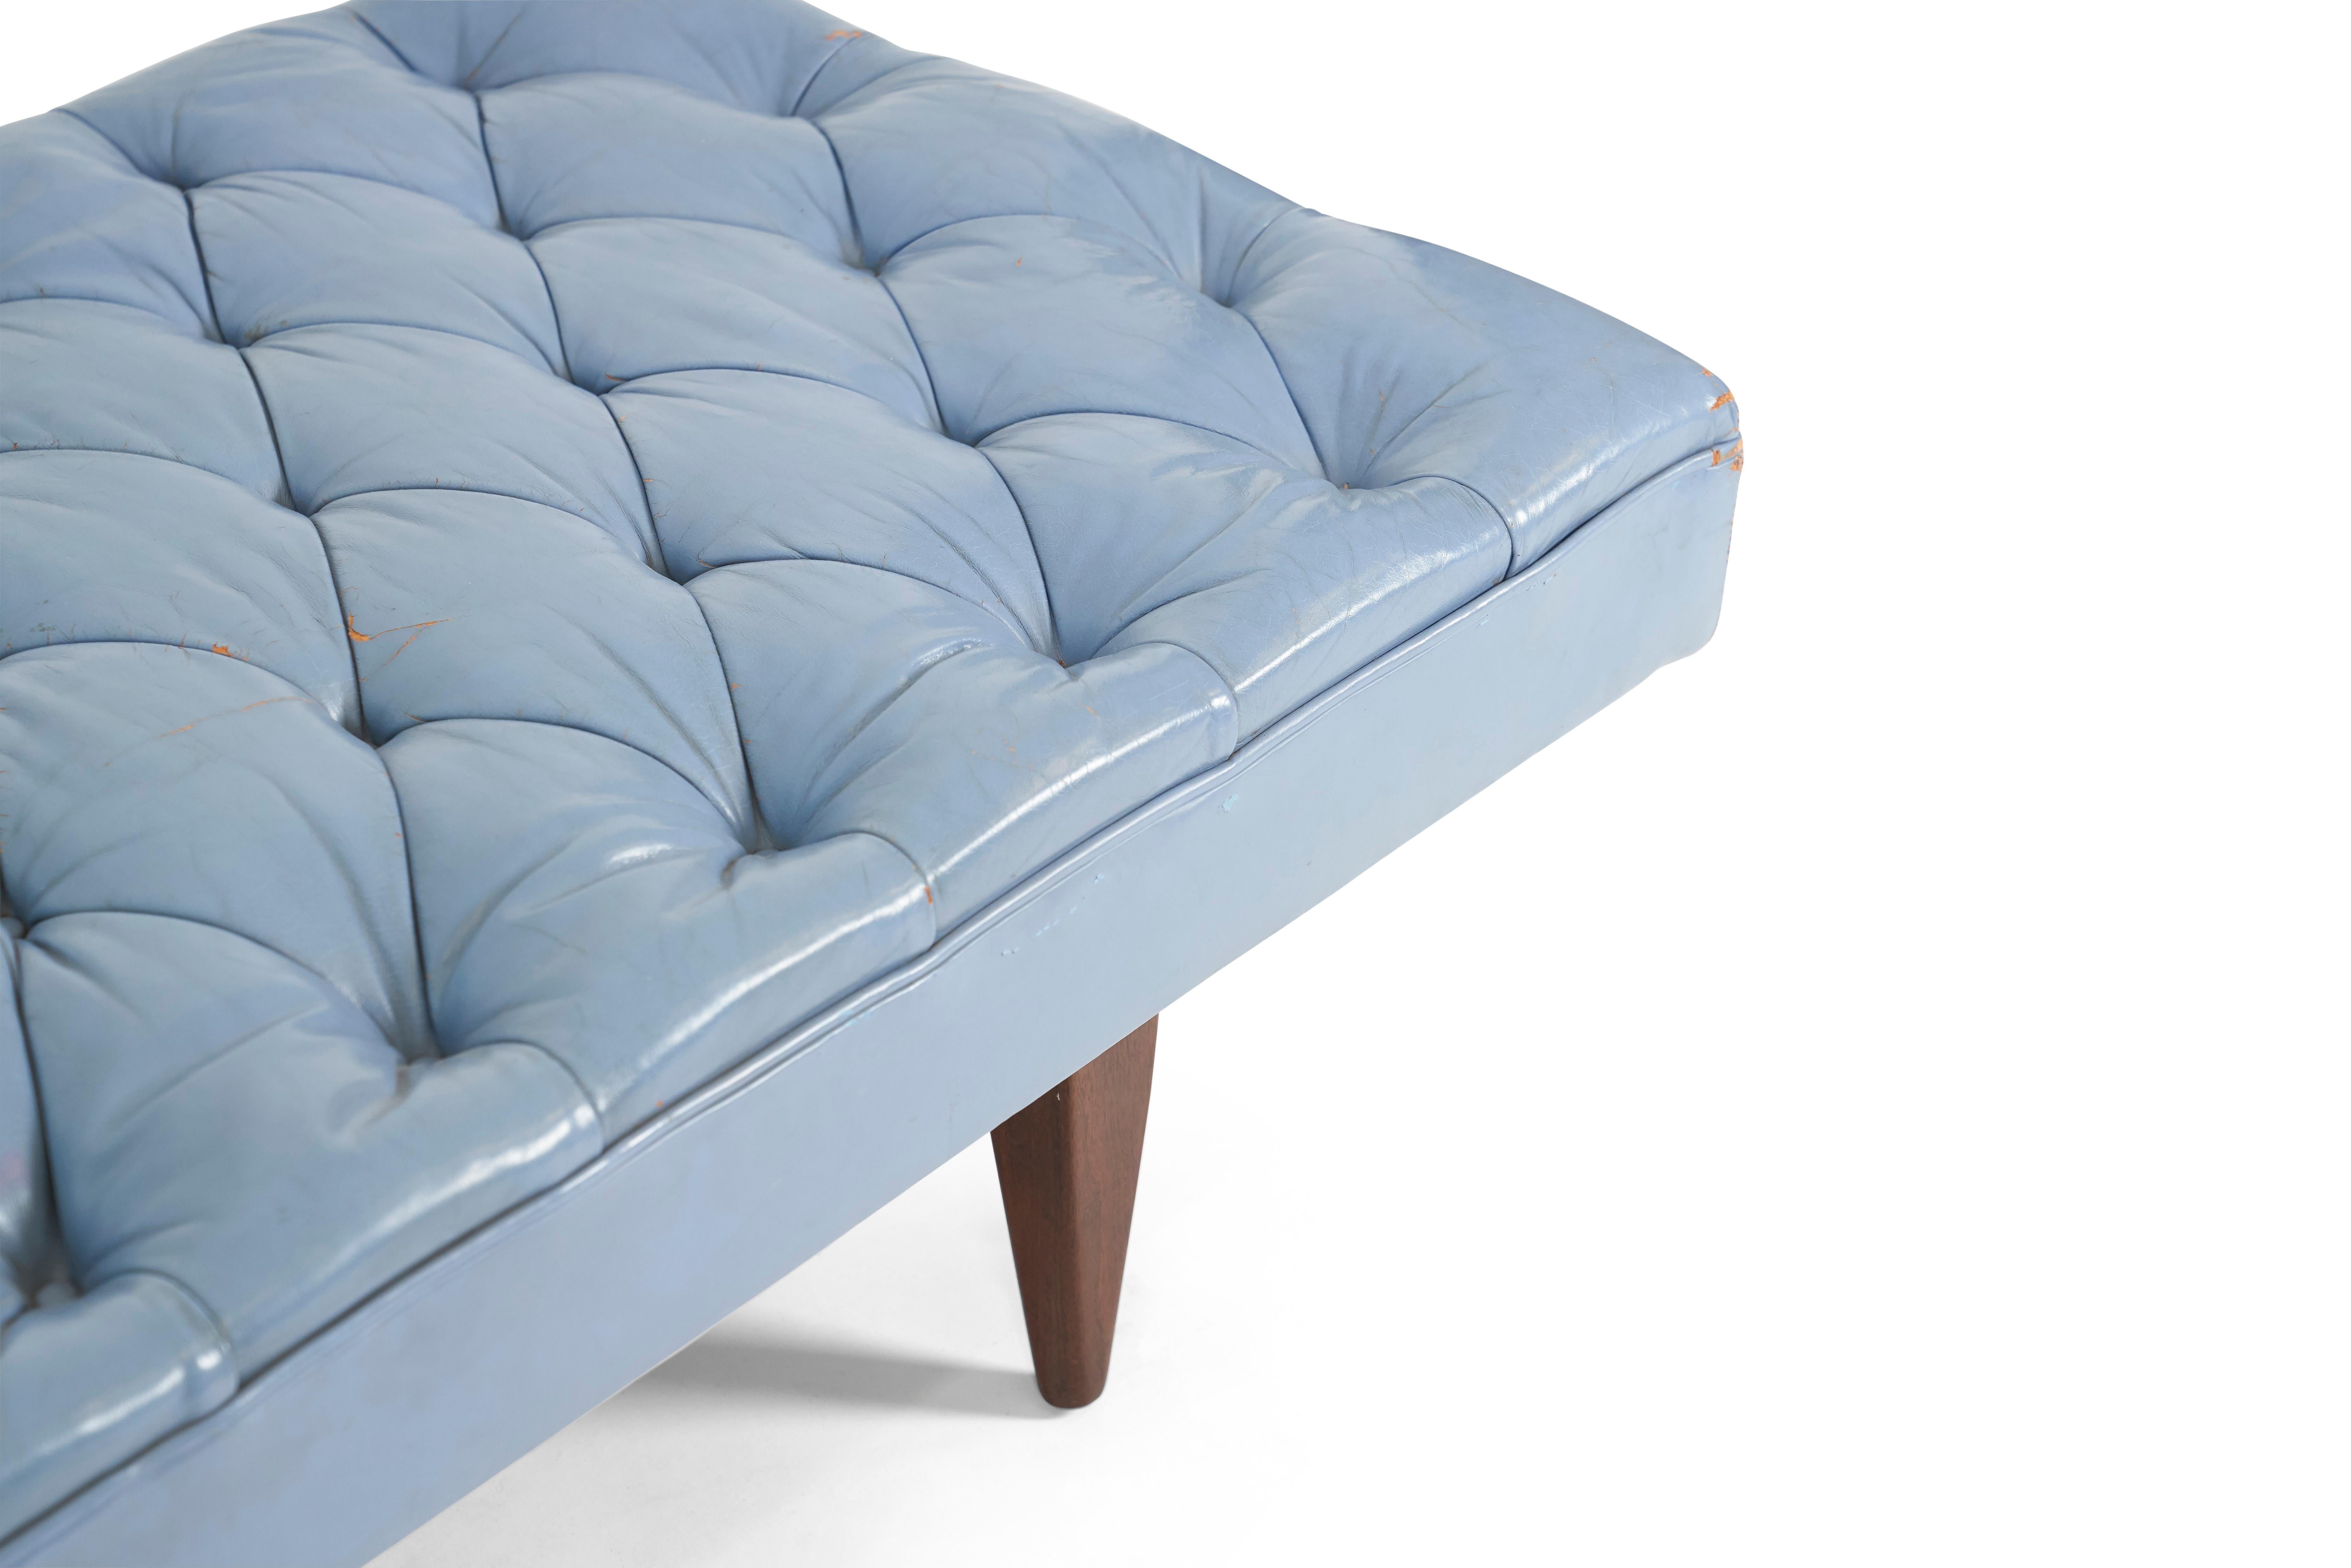 Mid-Century Modern Kipp Stewart Chesterfield Tufted Leather Daybed, Calvin Furniture 1960s